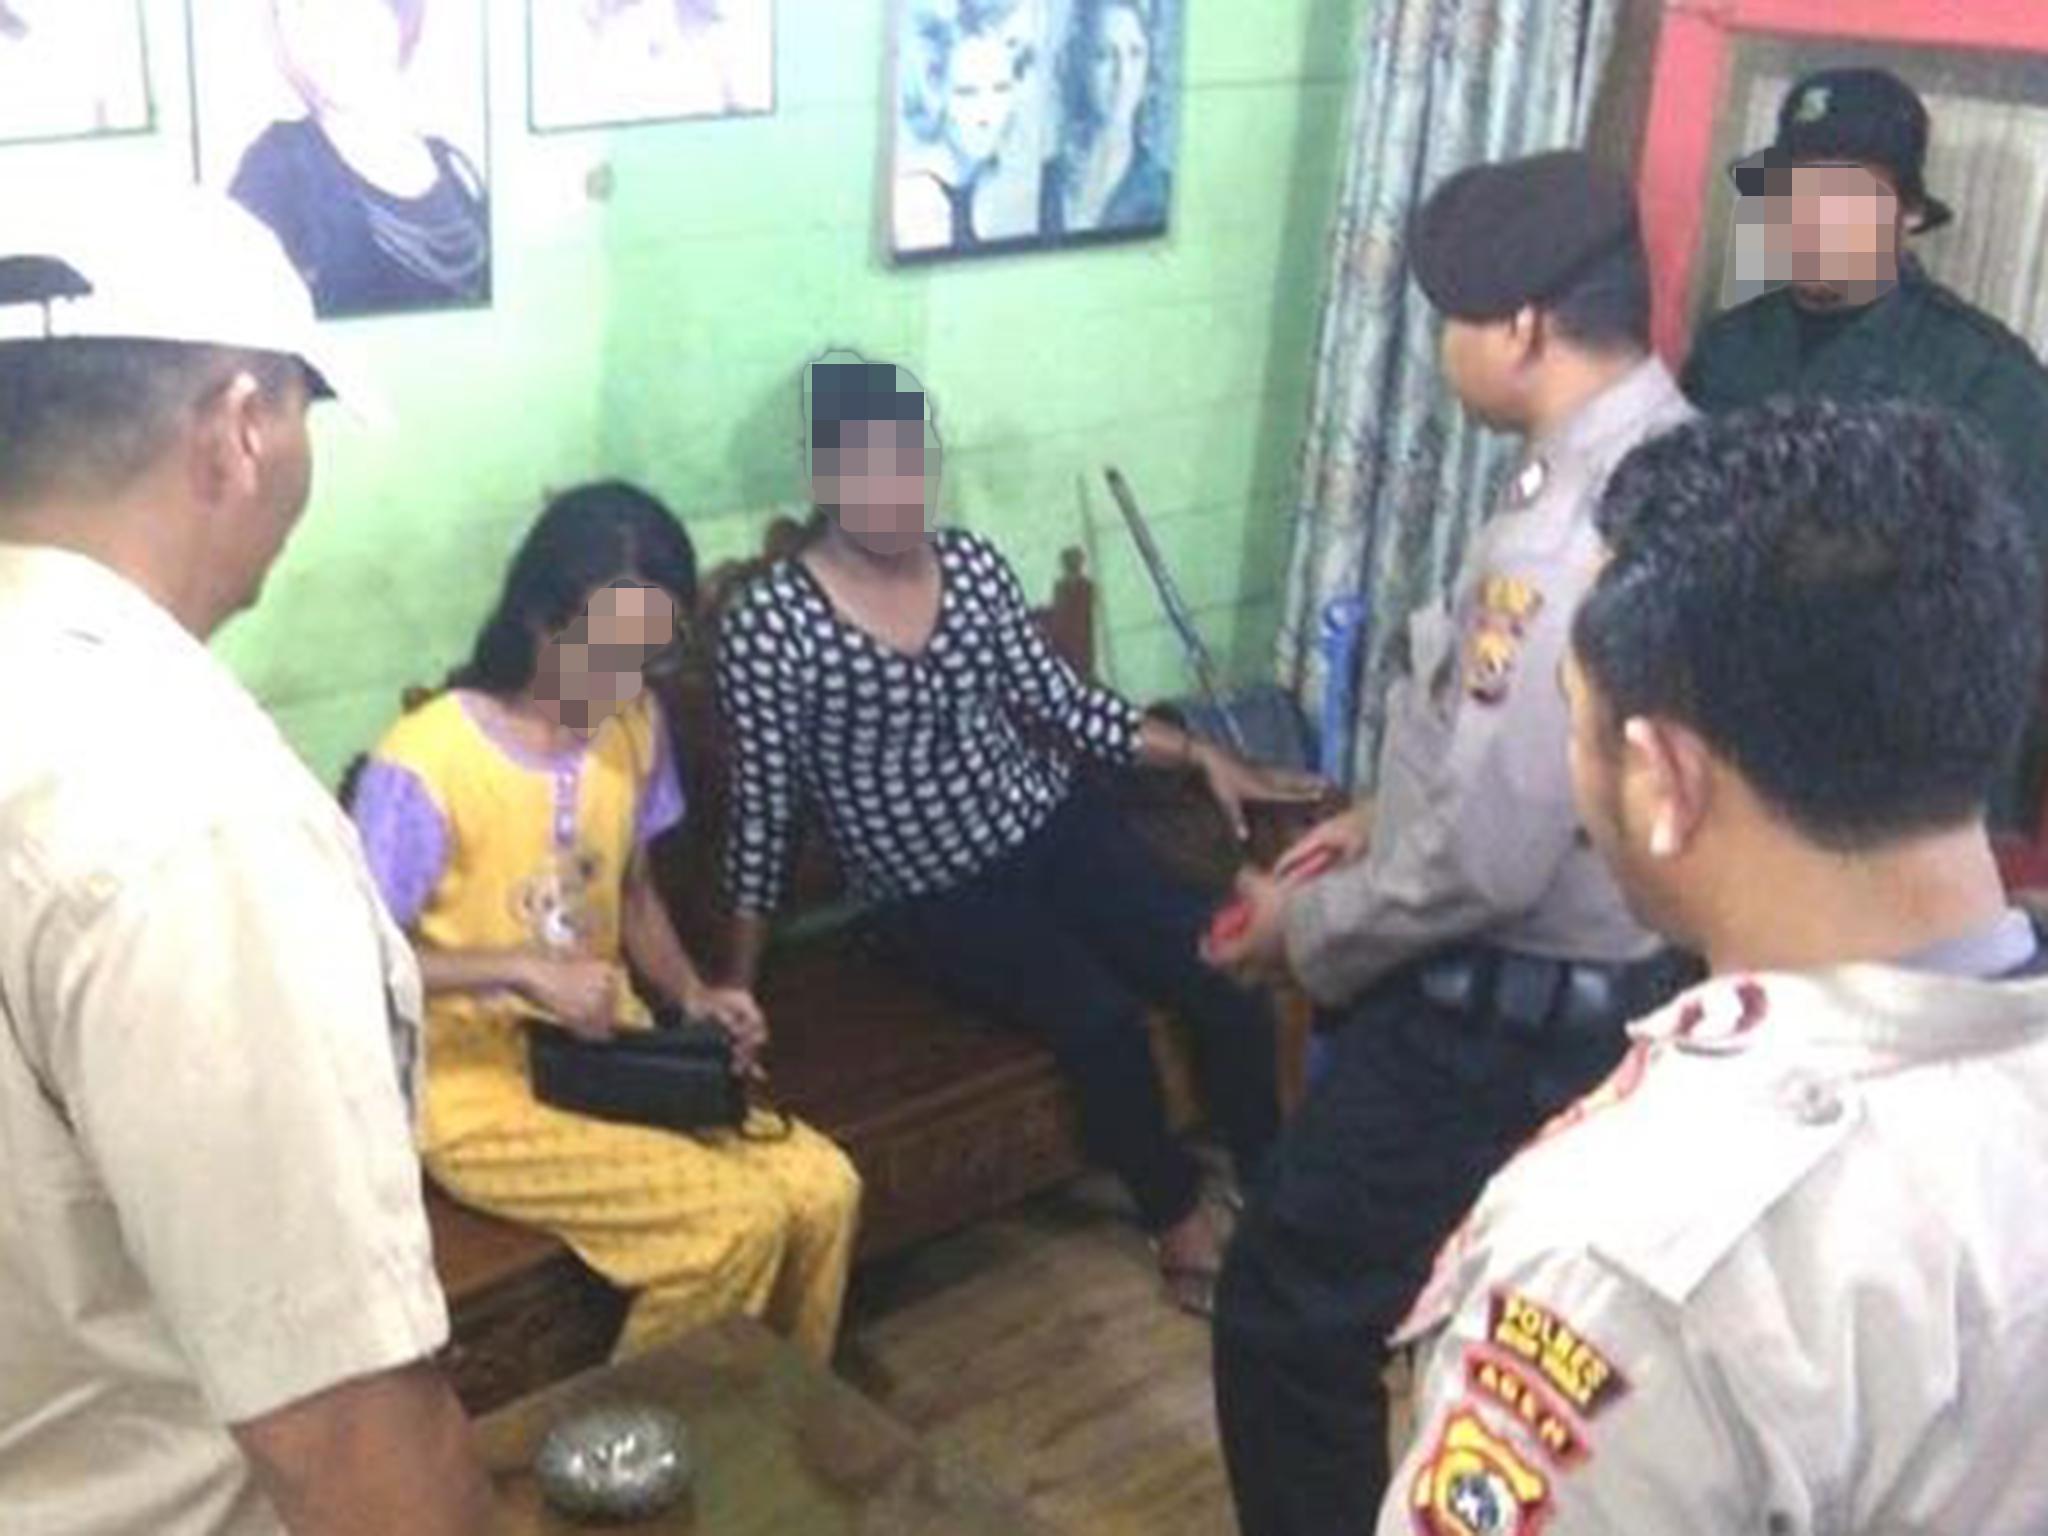 Twelve transgender women were detained by police in Aceh after raids on several beauty salons